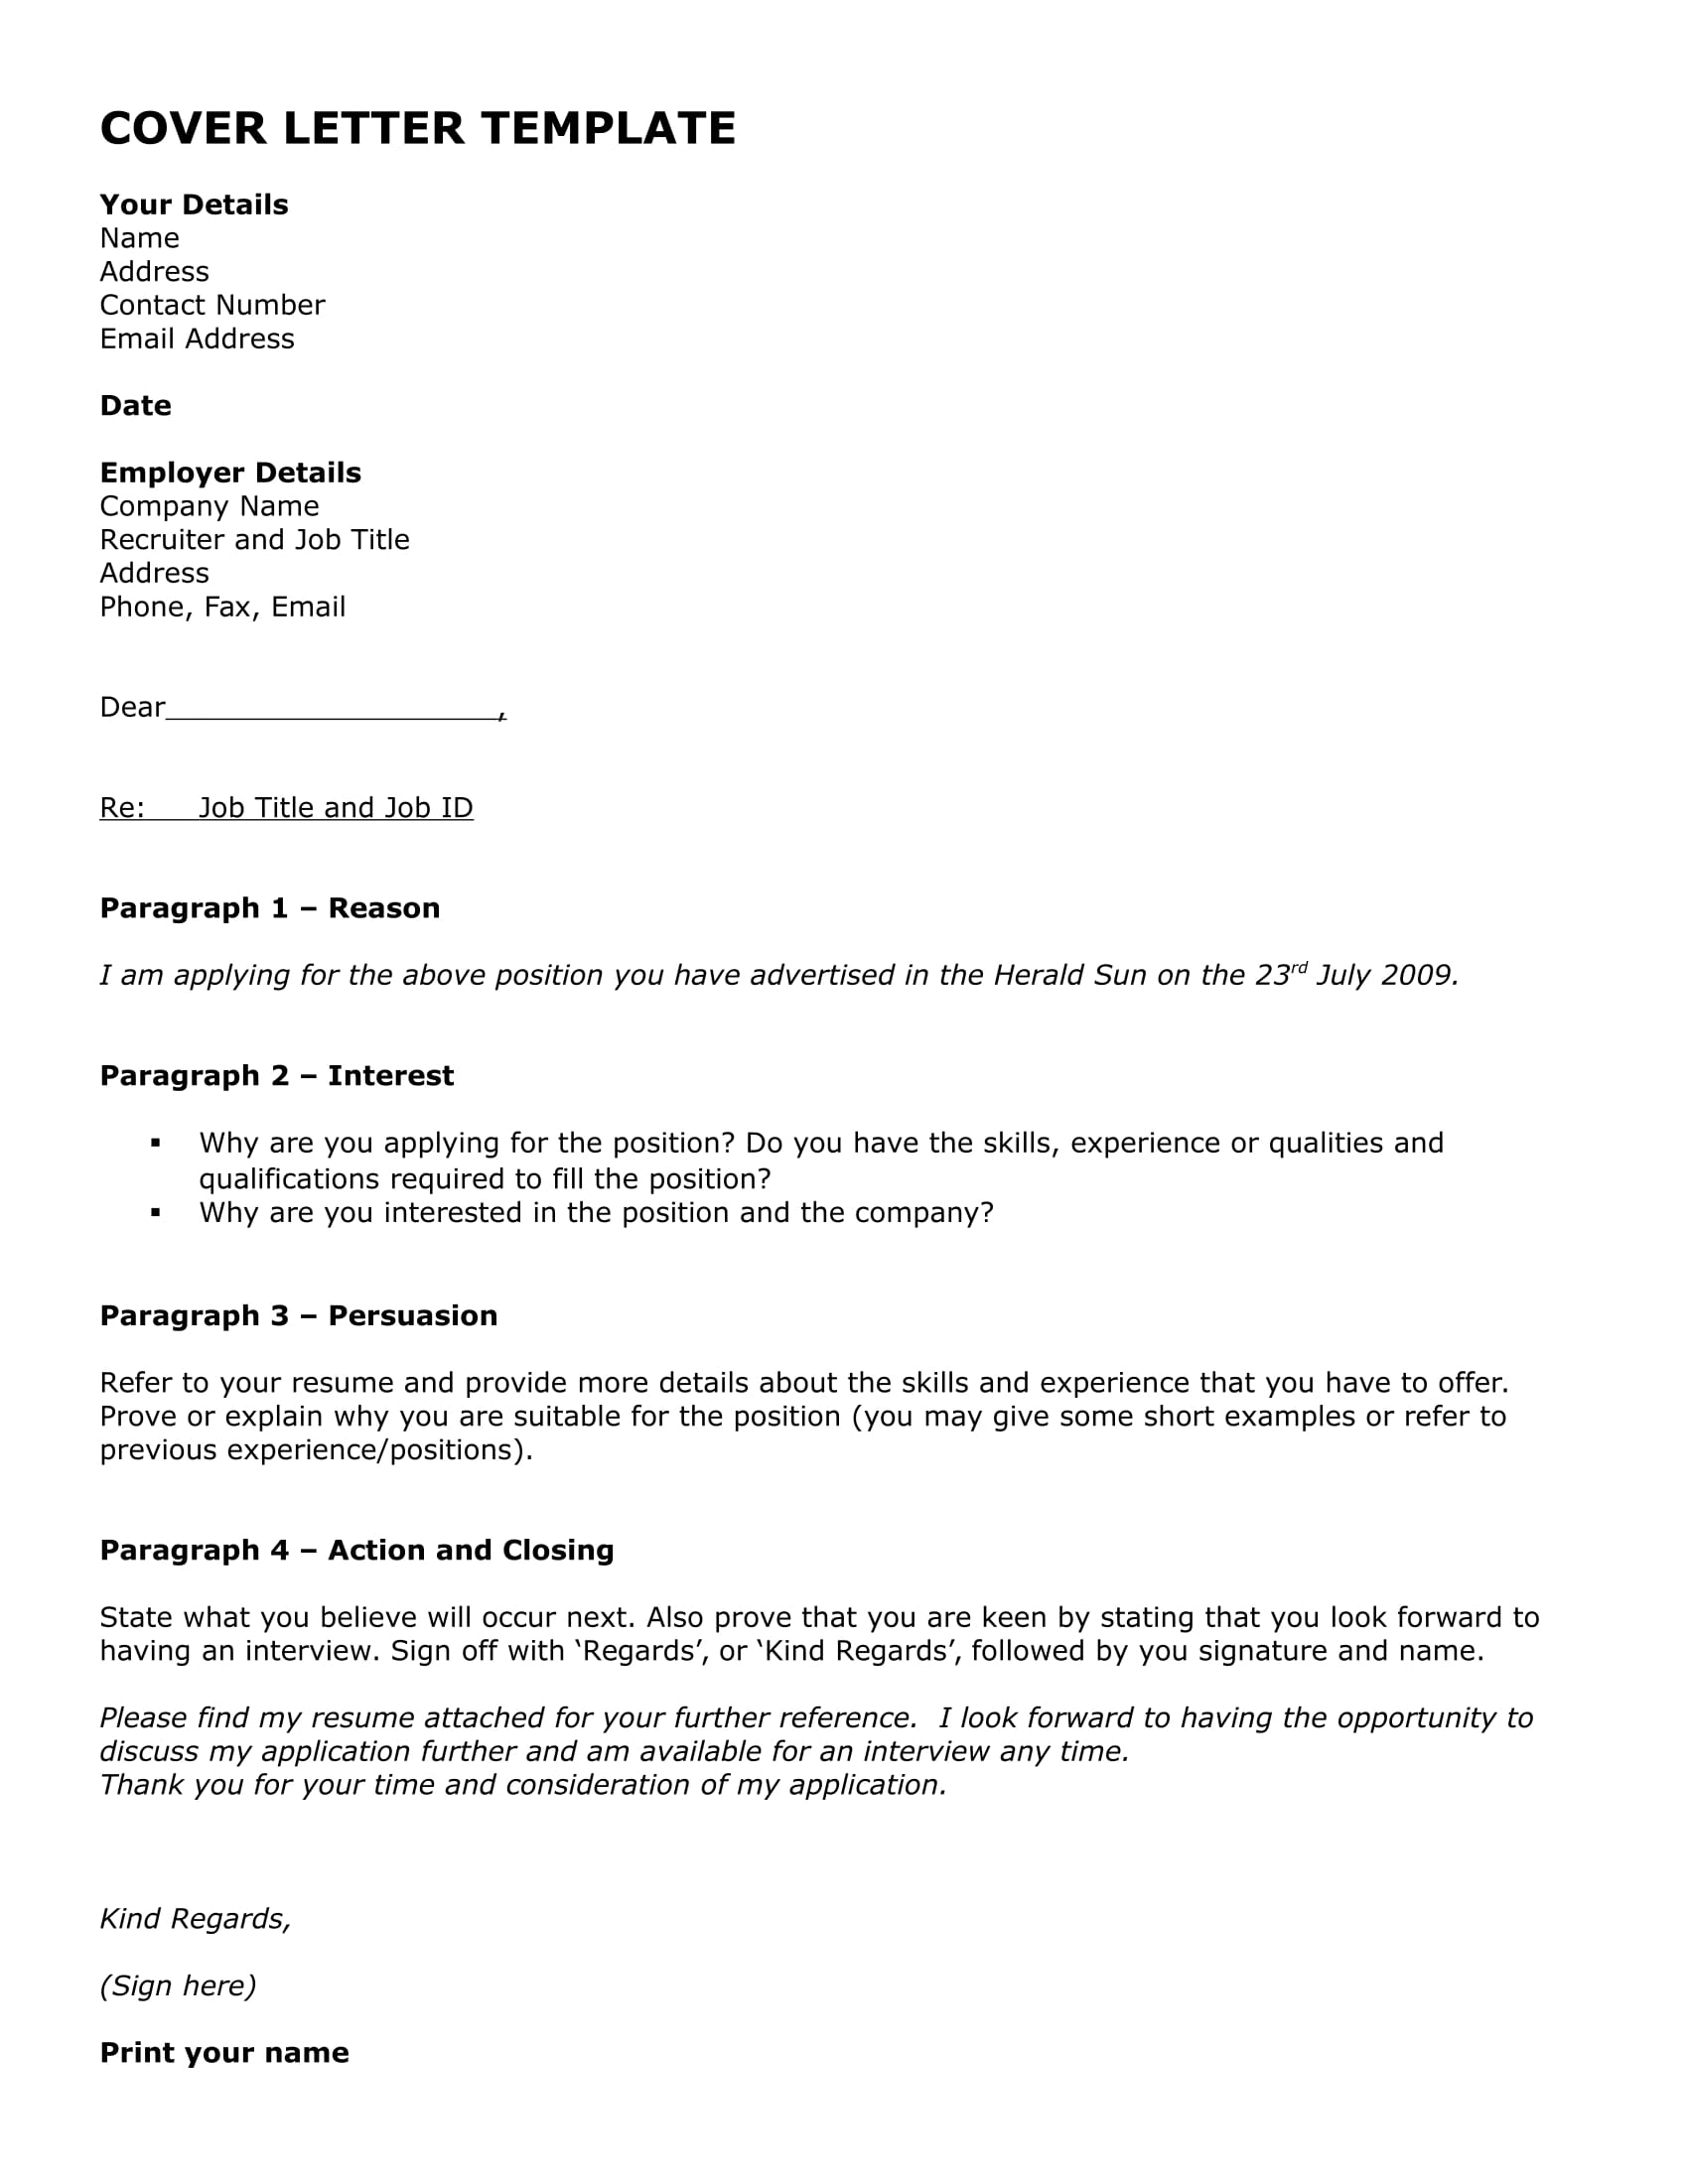 example covering letter email